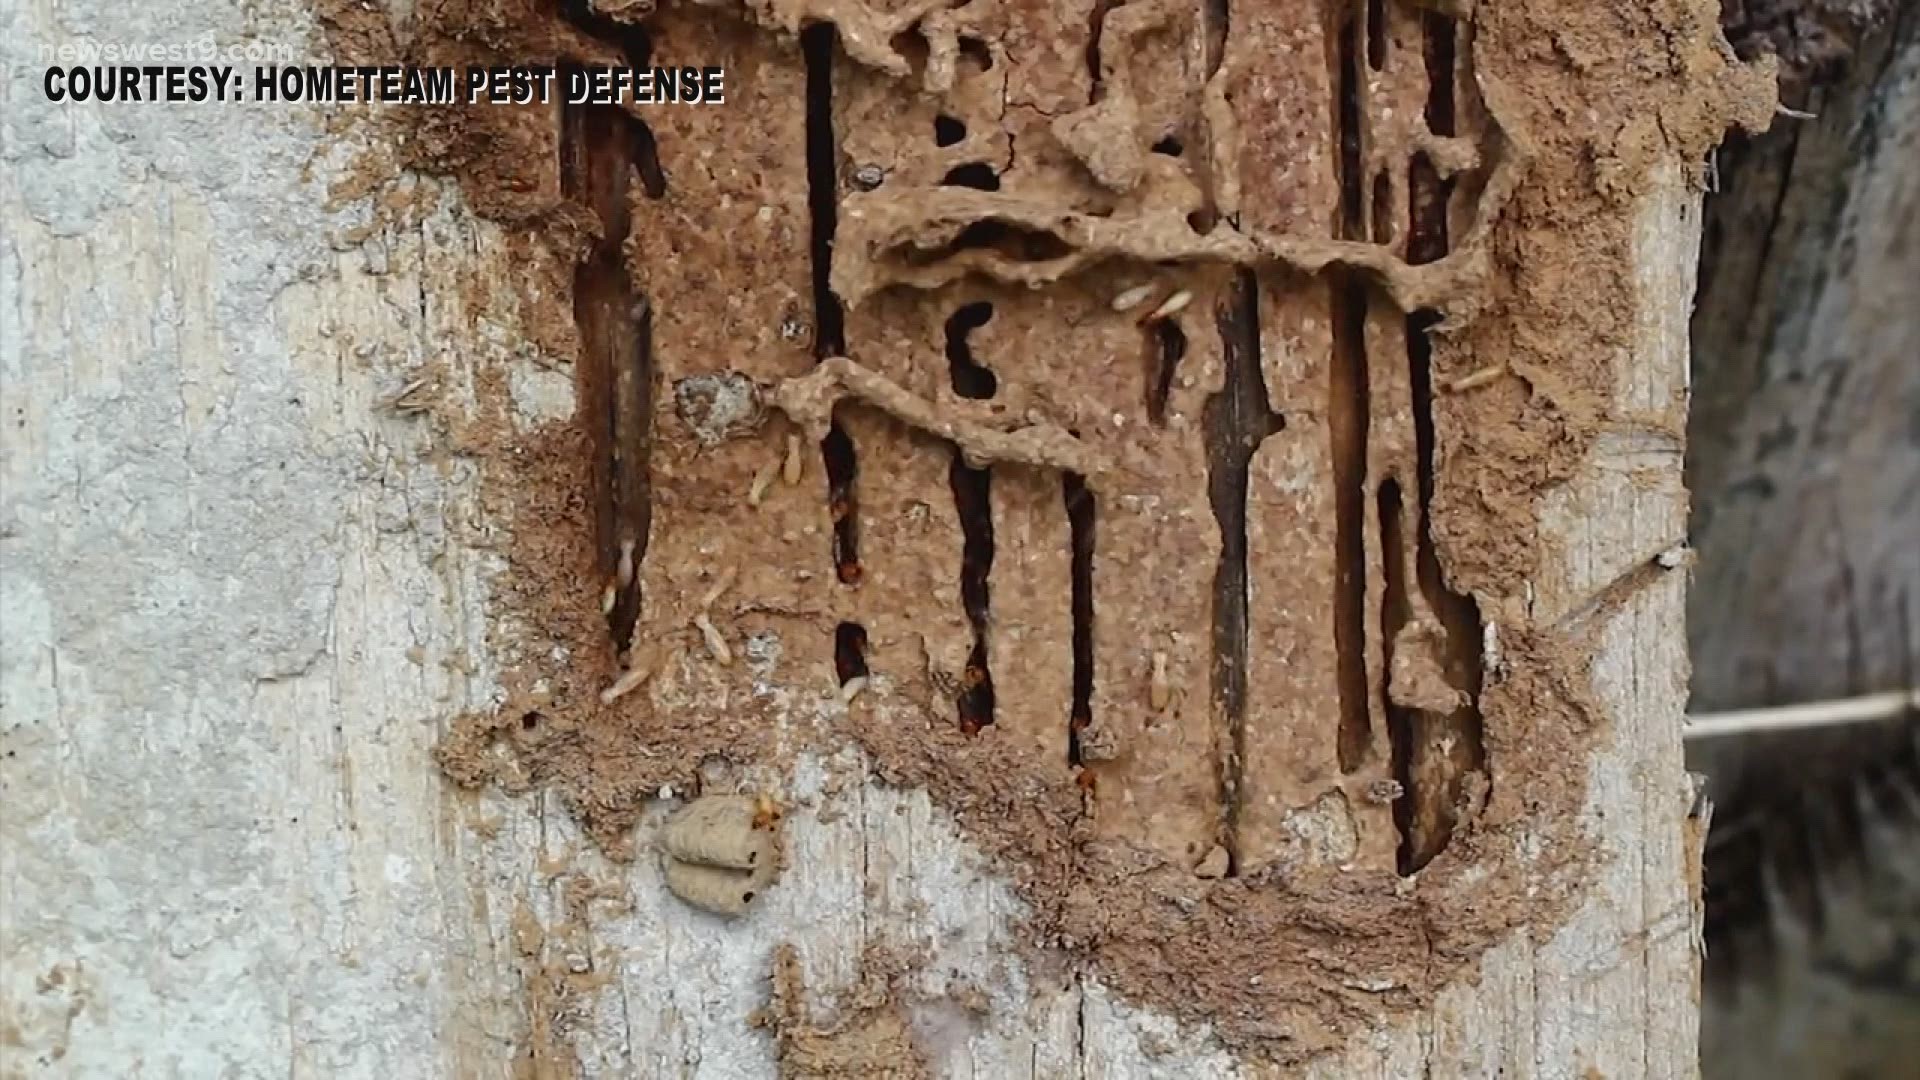 A Hufford Pest Control spokesperson tells me female termites can lay as many as 9 million eggs in their lifetime.